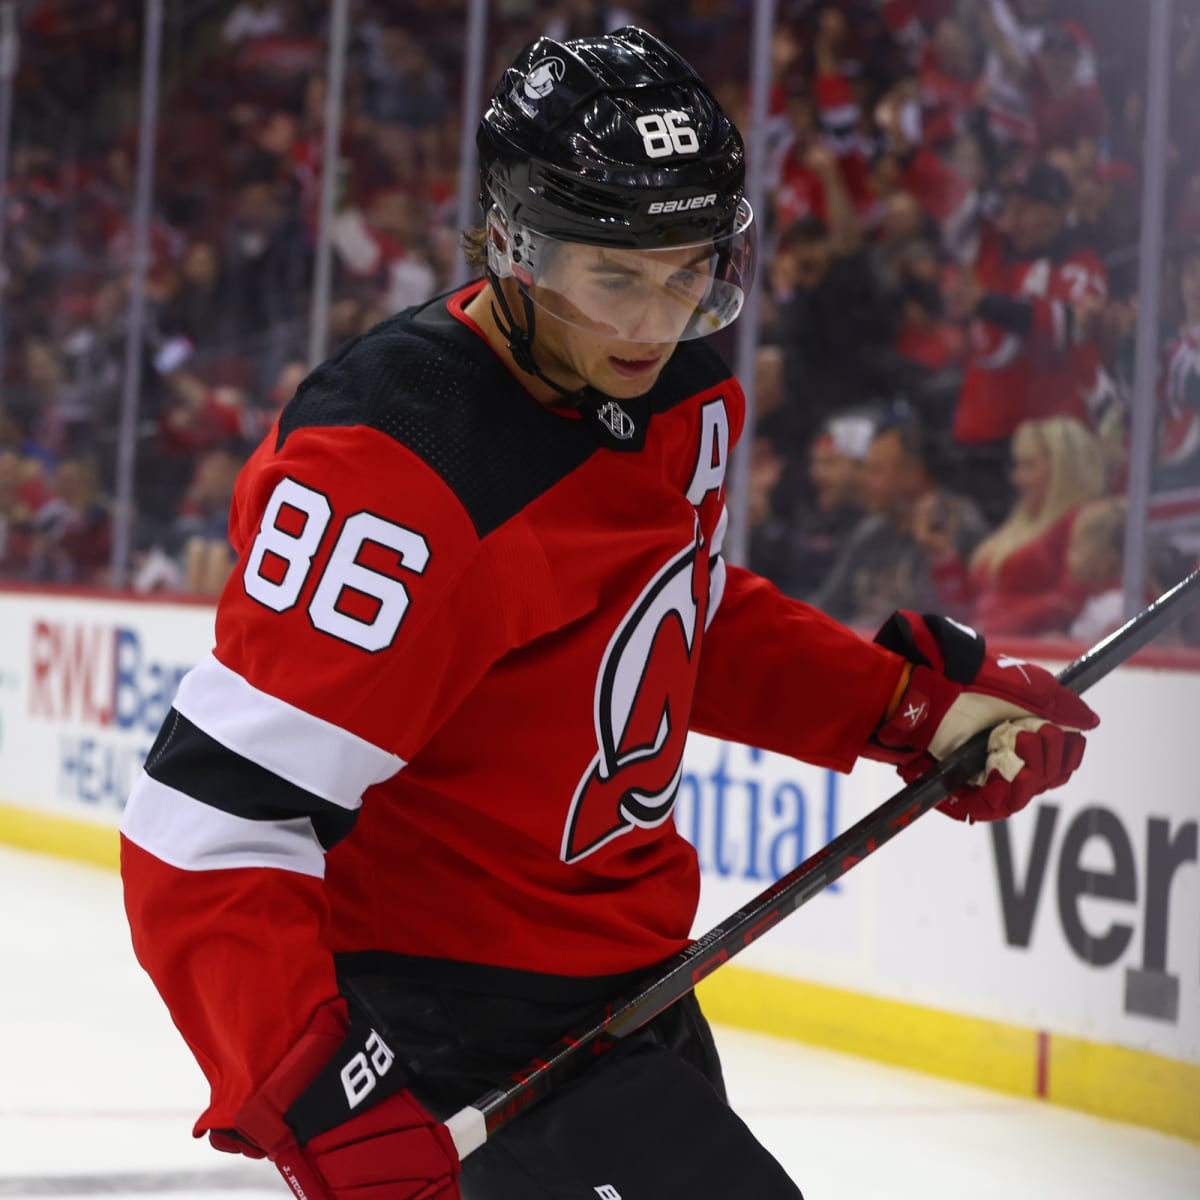 2022-23 New Jersey Devils: Destined For Success